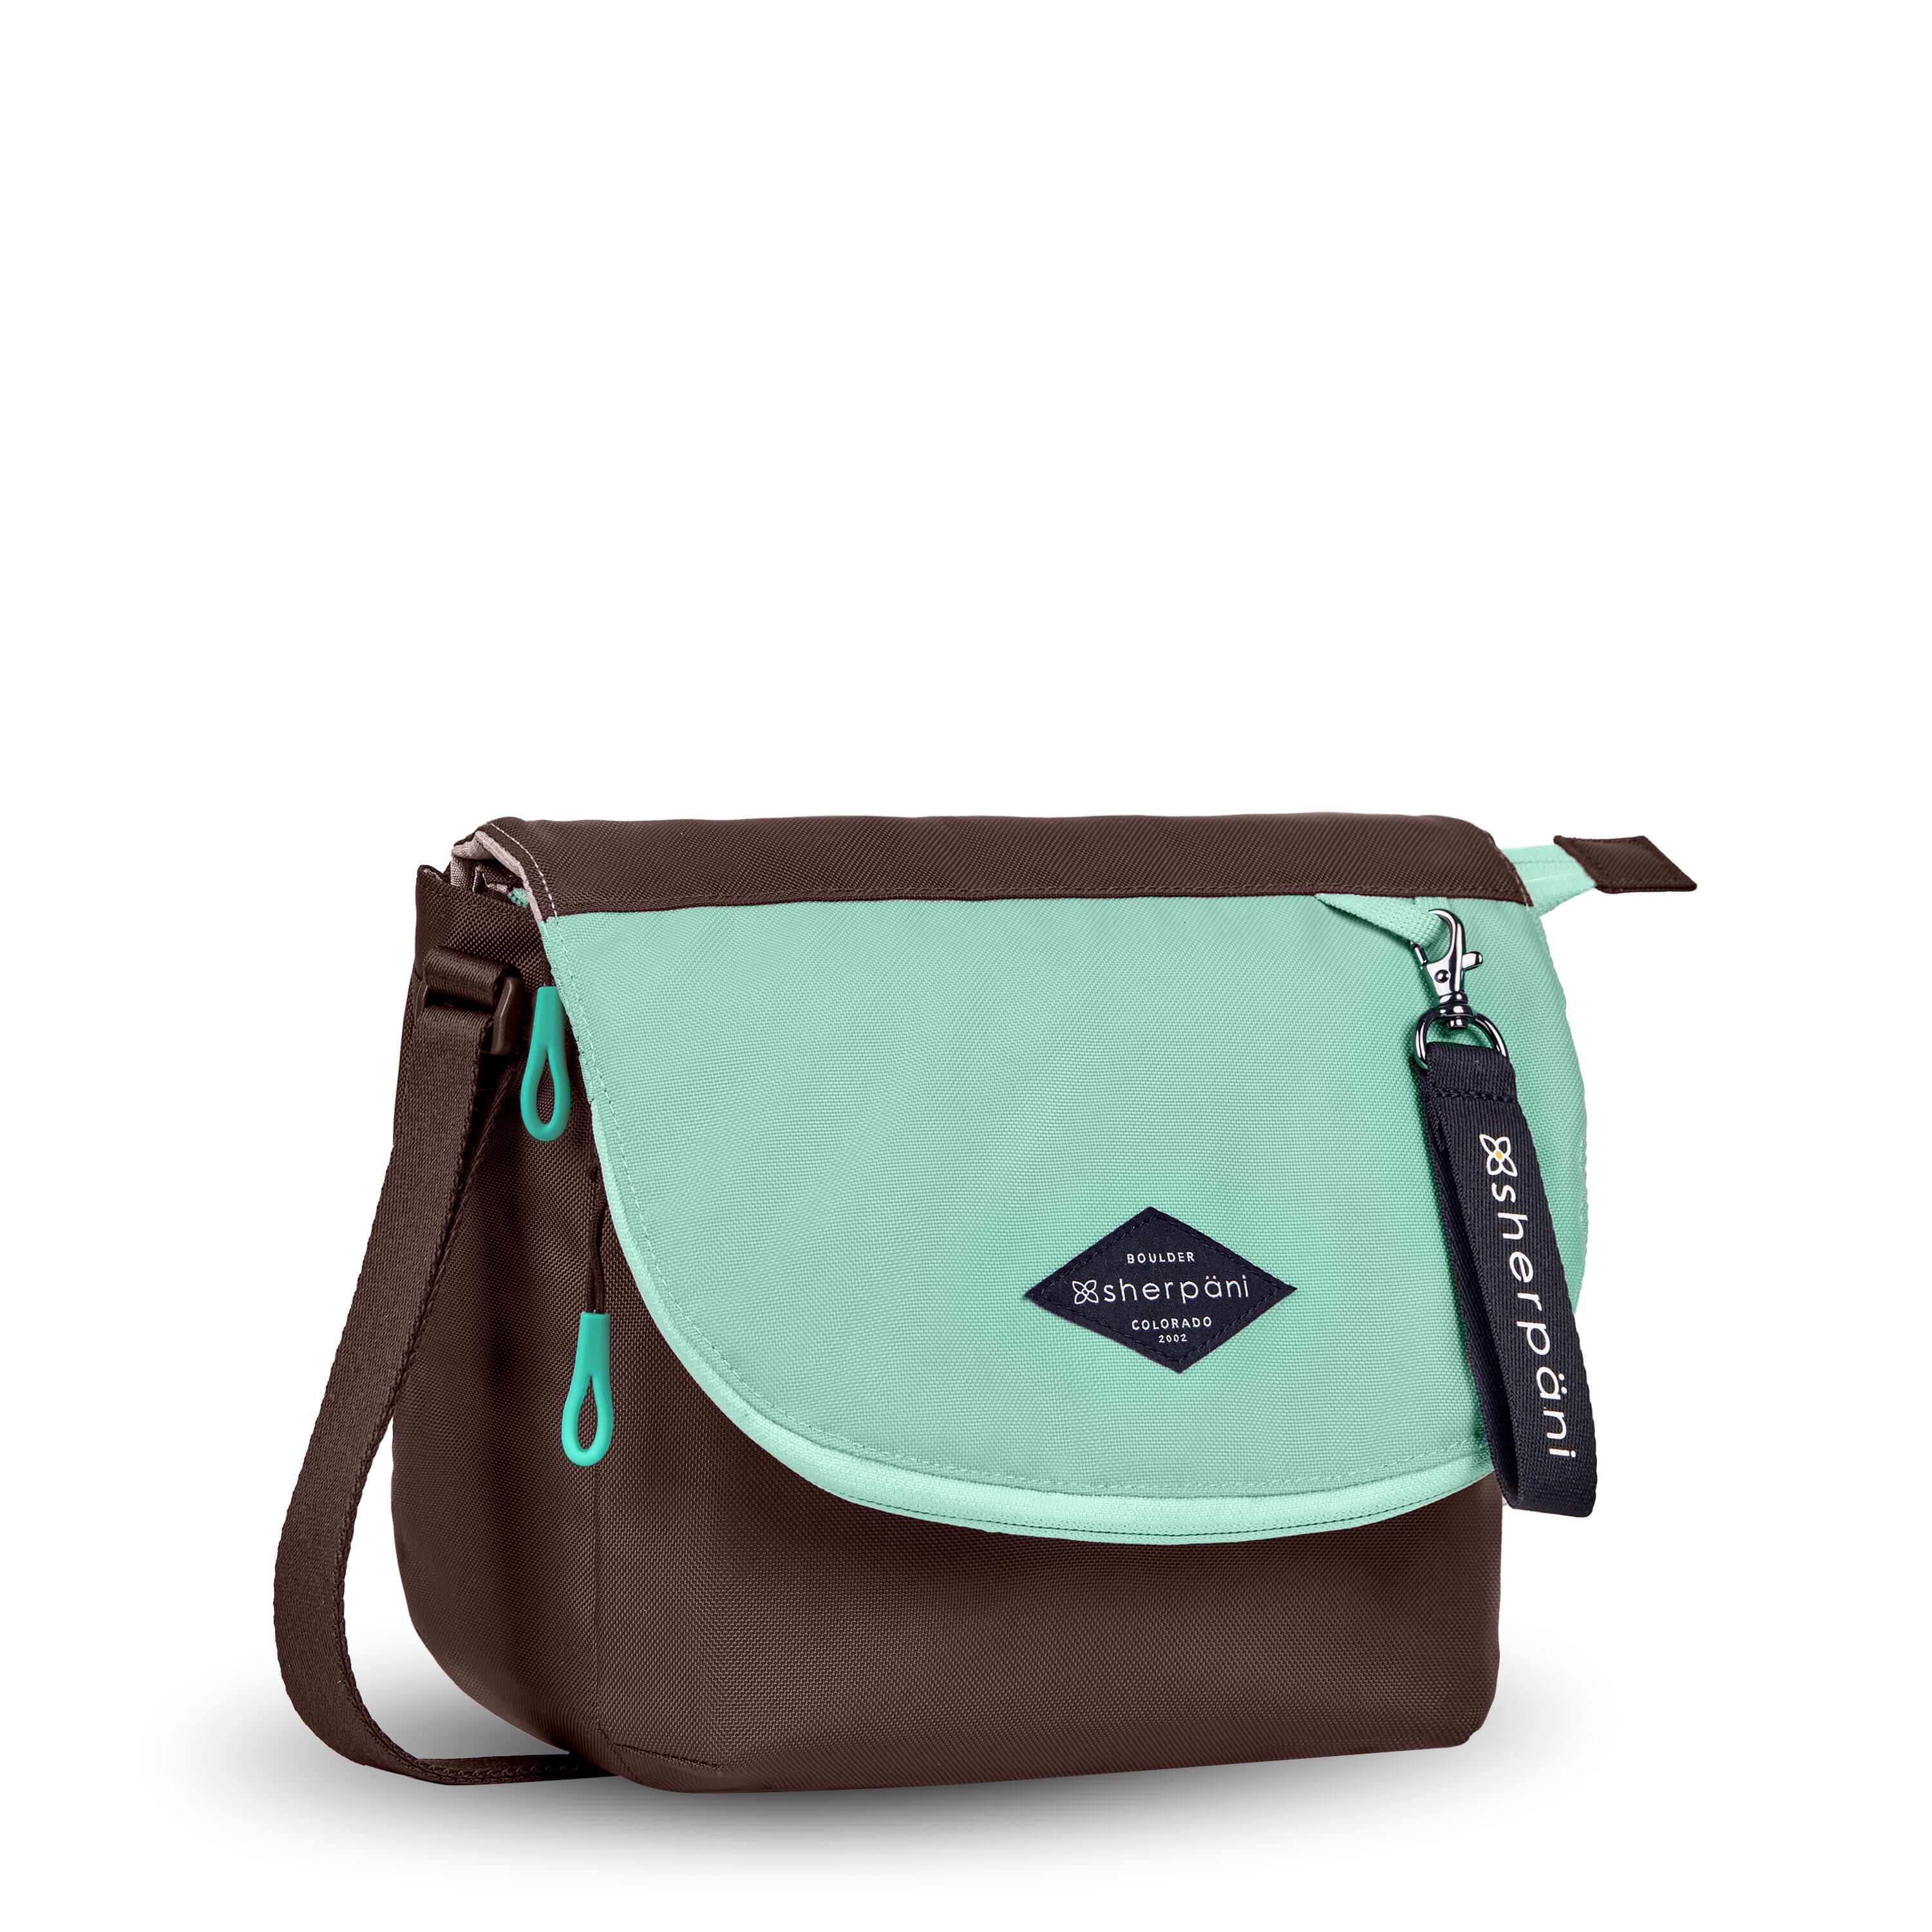 Angled front view of Sherpani crossbody, the Milli in Seagreen. The messenger style bag is two-toned: the layover flap is light green, the remainder of the bag is brown. Easy-pull zippers are accented in light green. The bag has an adjustable crossbody strap. A branded Sherpani keychain is clipped to a fabric loop in the upper right corner.